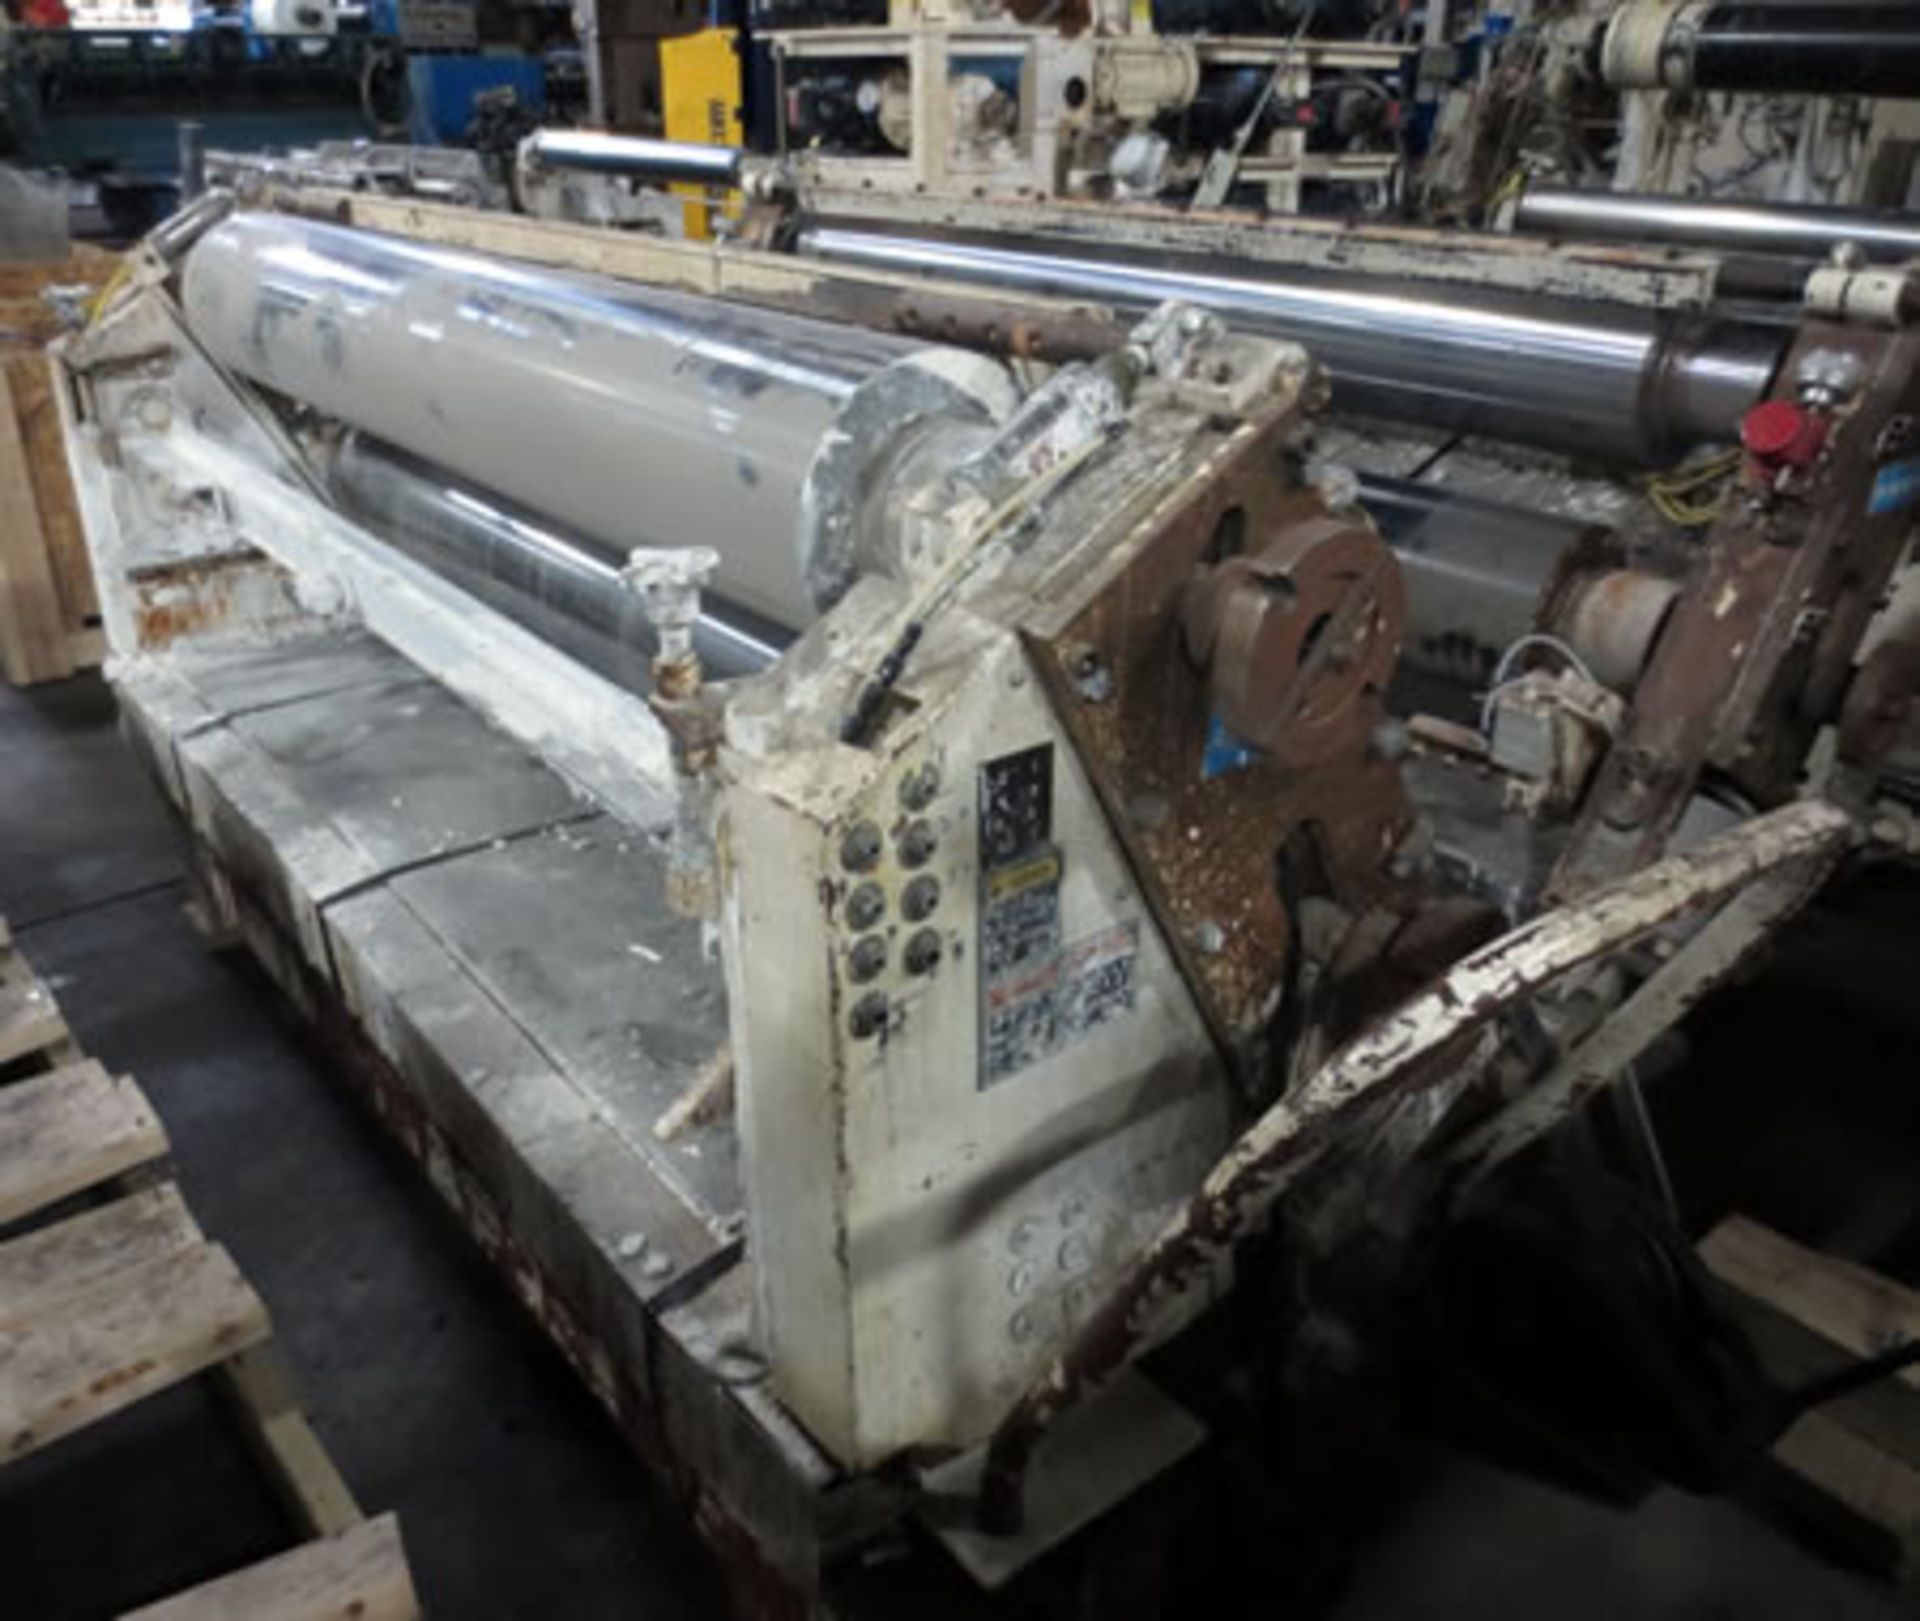 62" Black Clawson Coater Cartridge With 3-Roll Reverse Roll Cartridge. Works with Lot 26,27 or 28. - Image 4 of 4